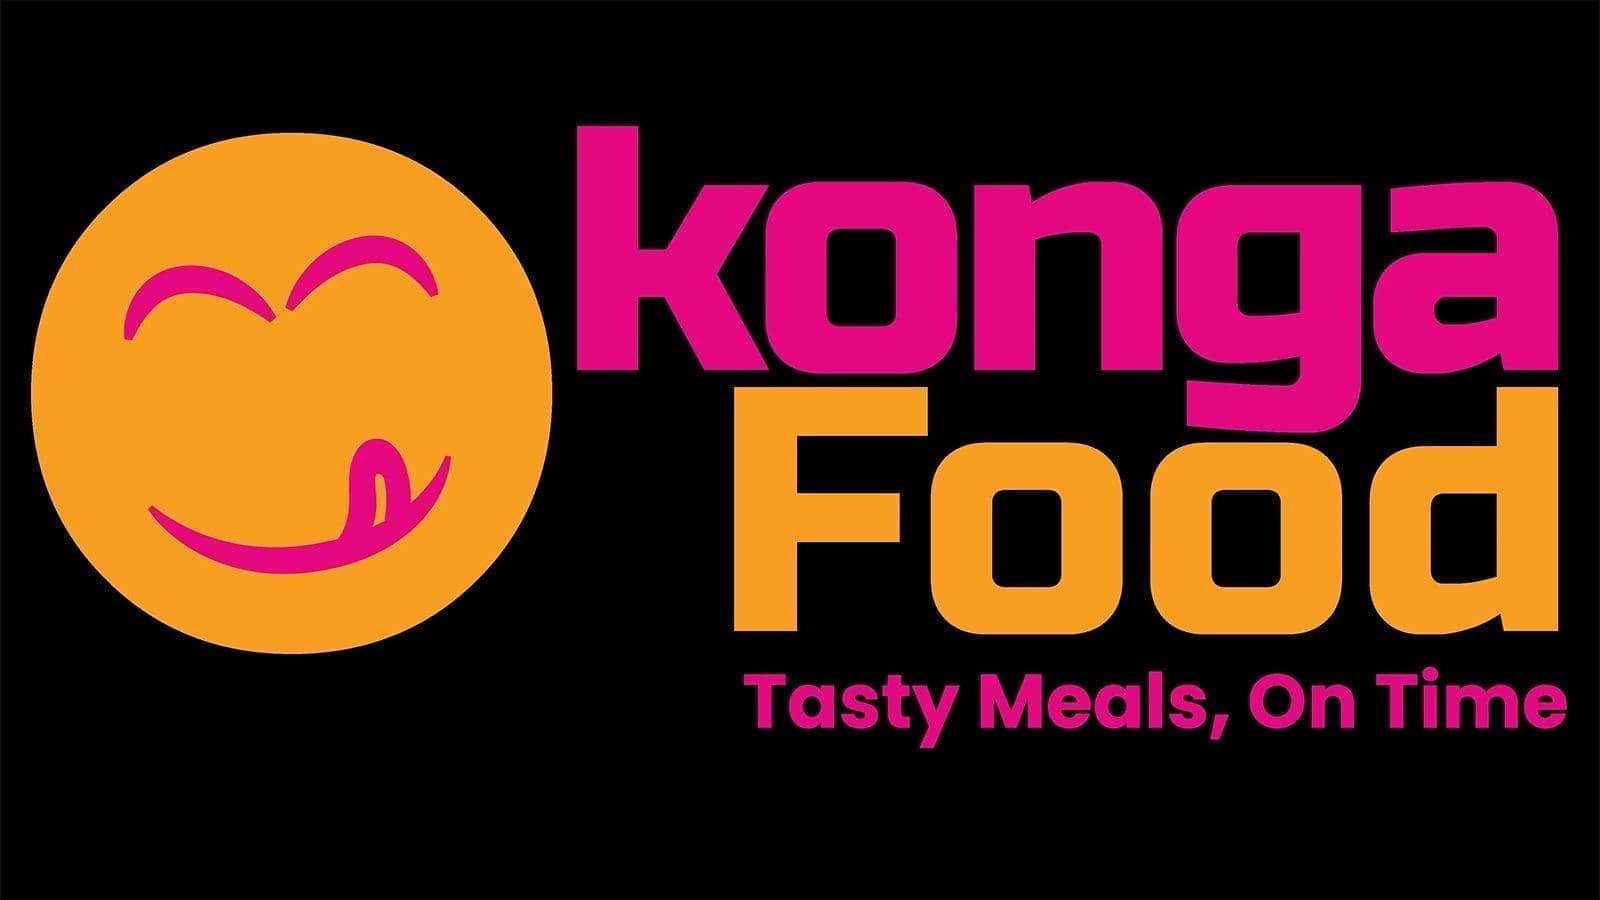 Nigeria to welcome launch of new food delivery outfit under ecommerce company Konga